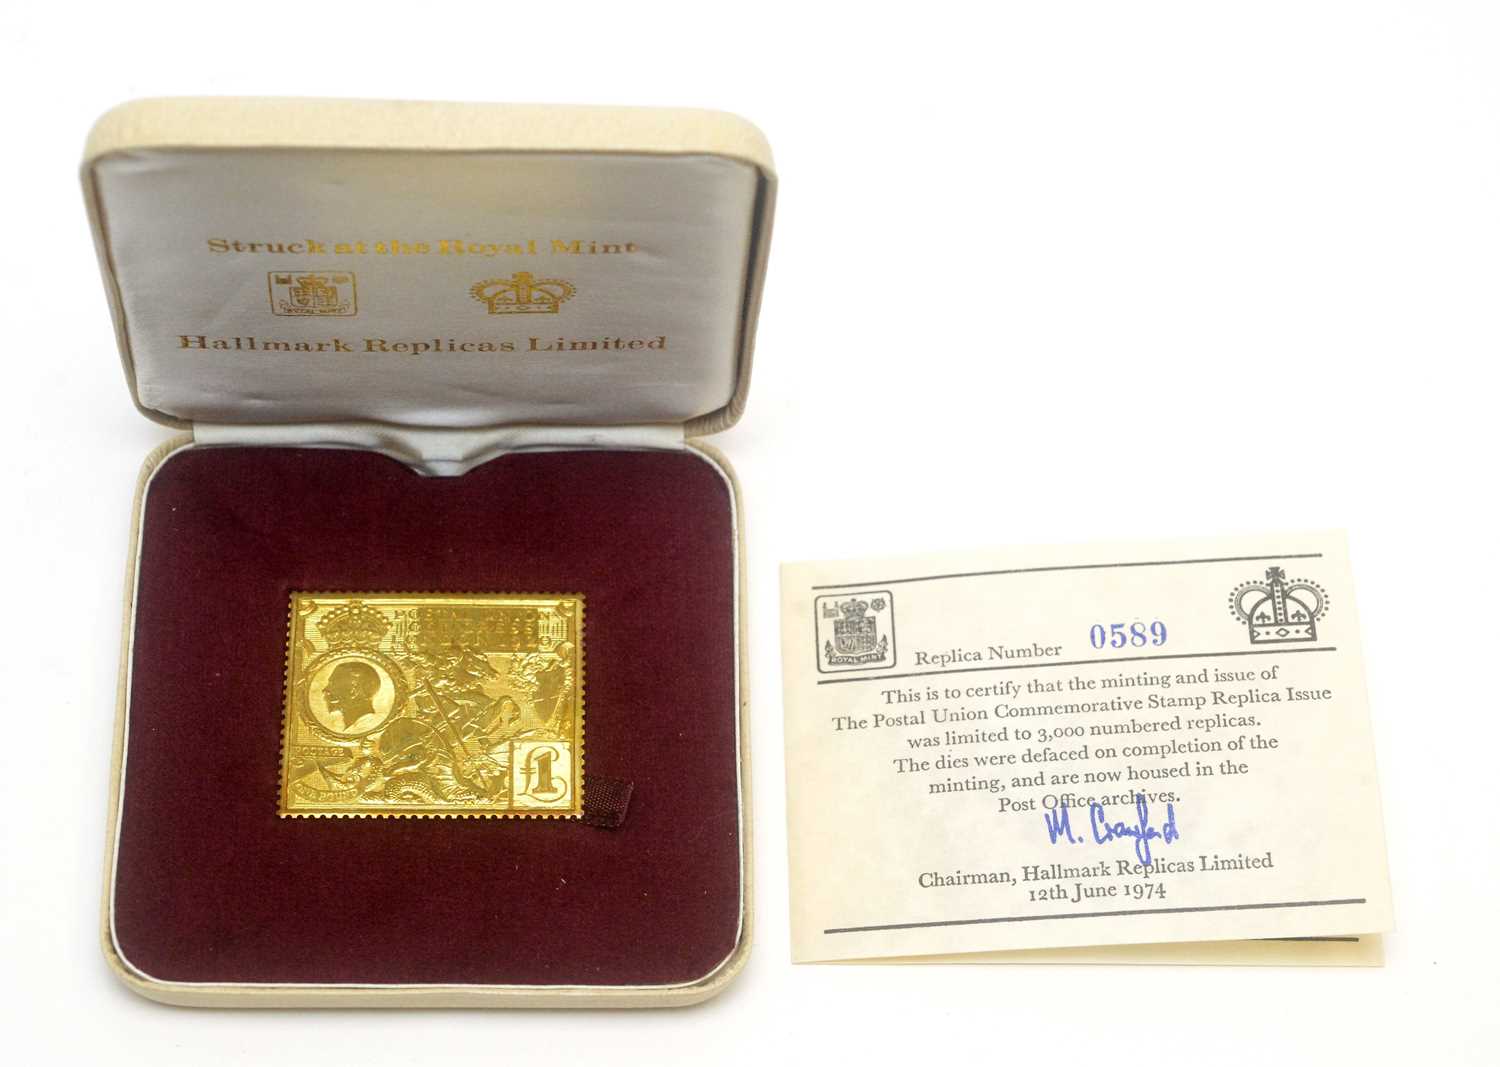 952 - Royal Mint for Hallmarks Replica Limited Postal Union Congress replica £1 stamp, 